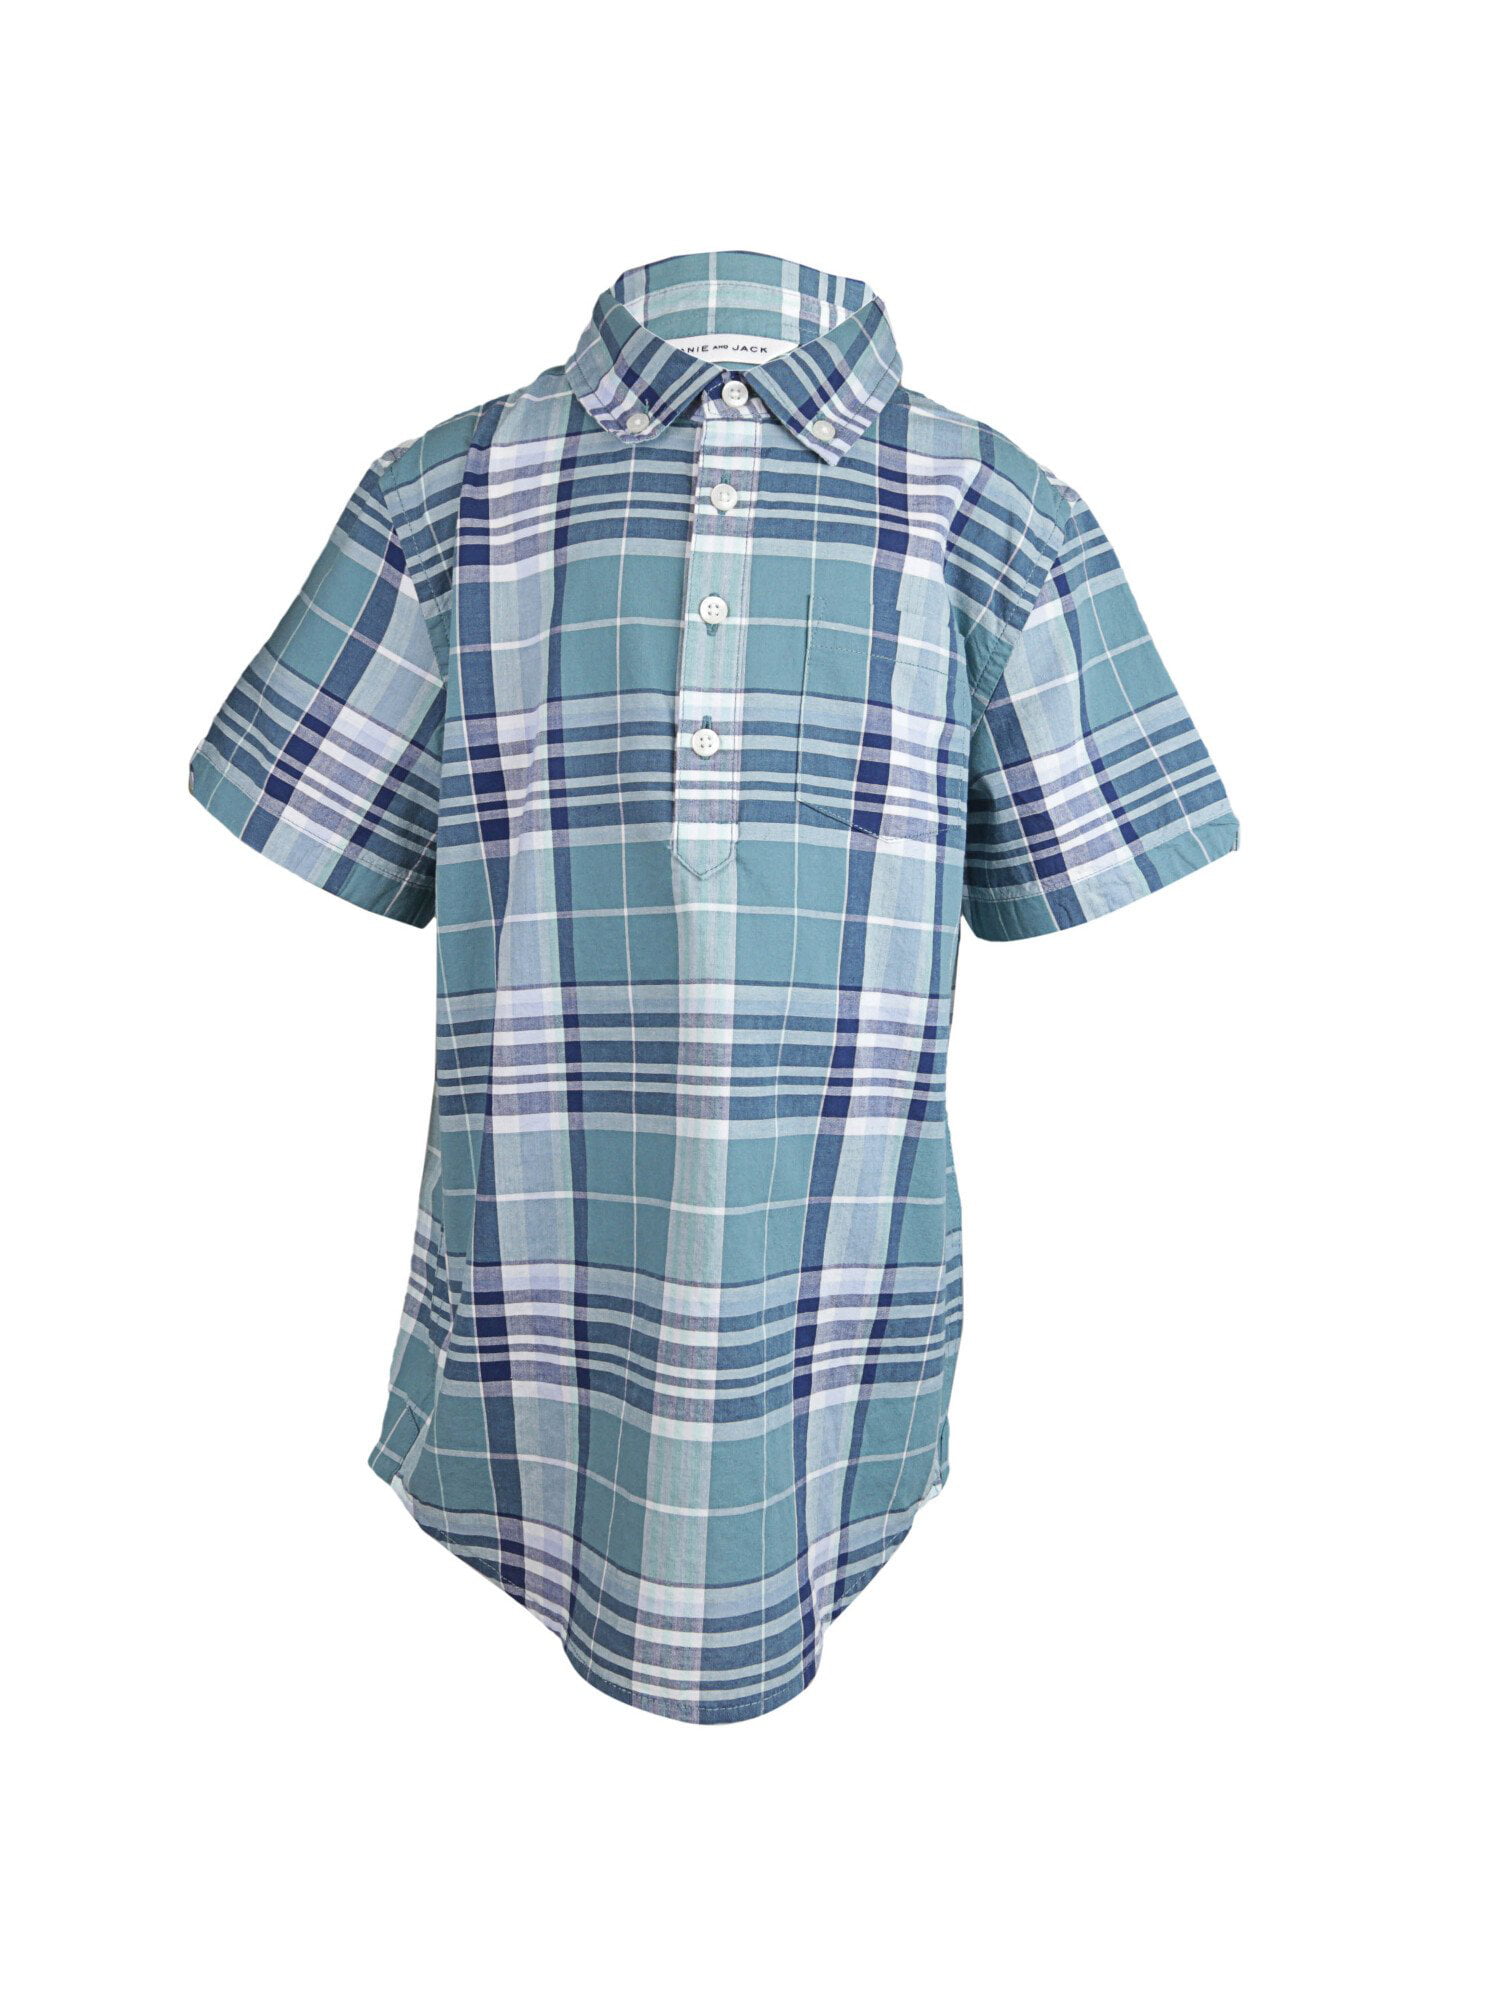 Details about   Janie And Jack Girl's Madras Plaid Shirt Button-Down & Dress 